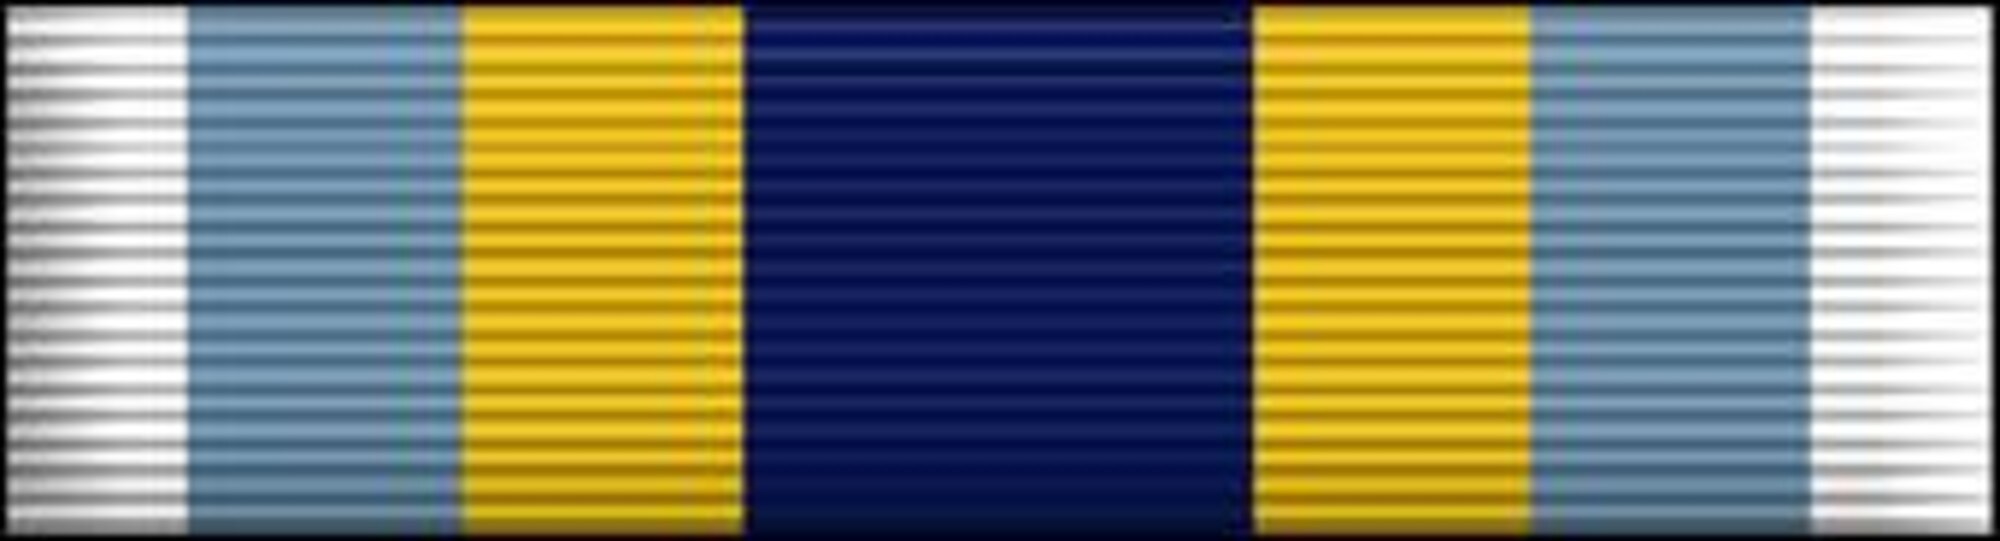 USAF Basic Military Training Honor Graduate Ribbon, Air Force Awards and Decorations (enhance color), U.S. Air Force graphic, AFNEWS/PAND.  The JPG image is a stylized version whereas the EPS version is a two-dimensional line art illustration.